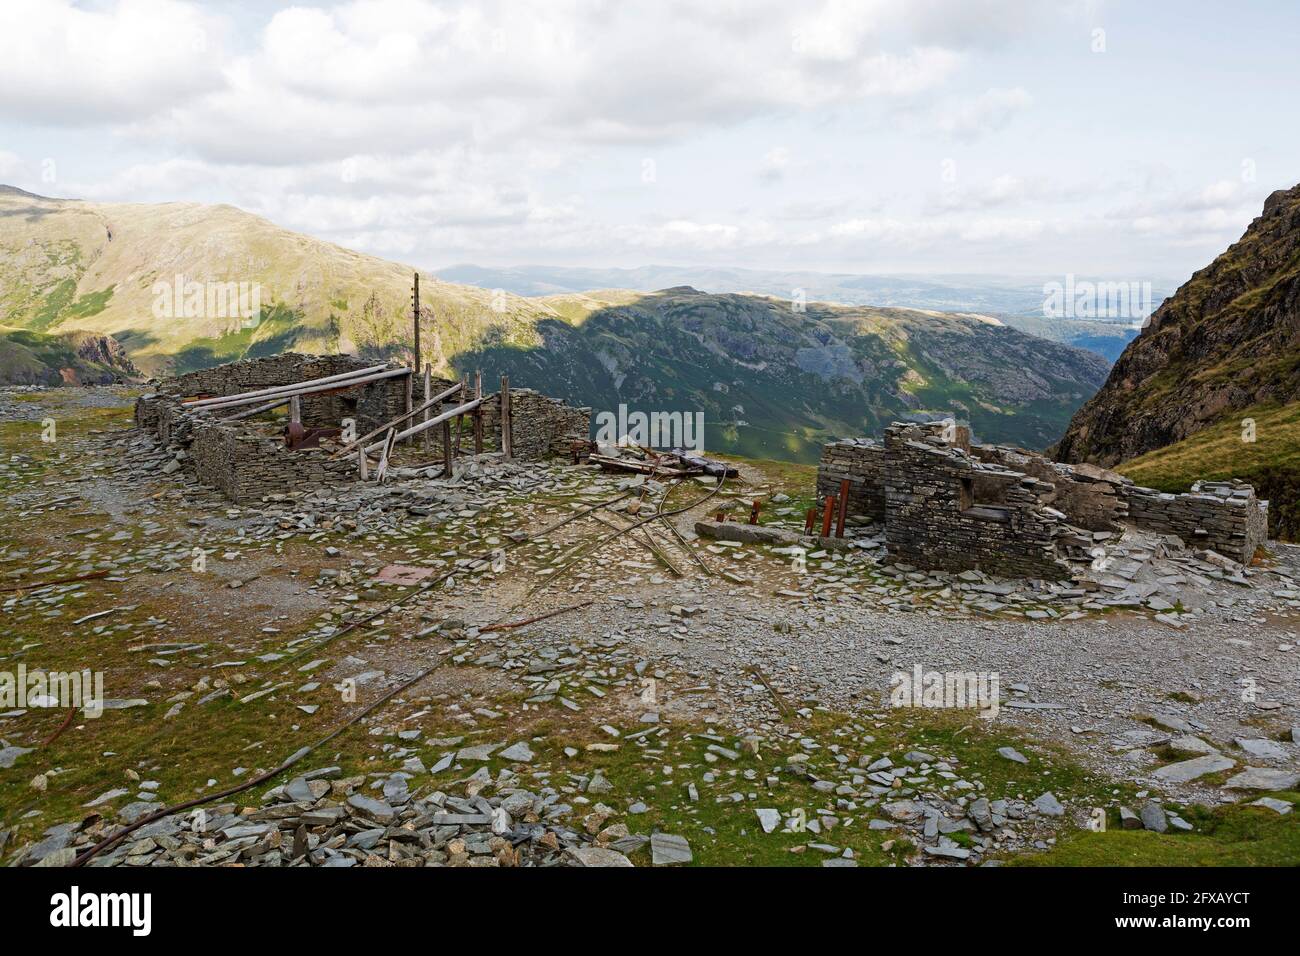 A ruined building that was once a hub for slate mining on the Old Man of Coniston in Cumbria, England. Stock Photo